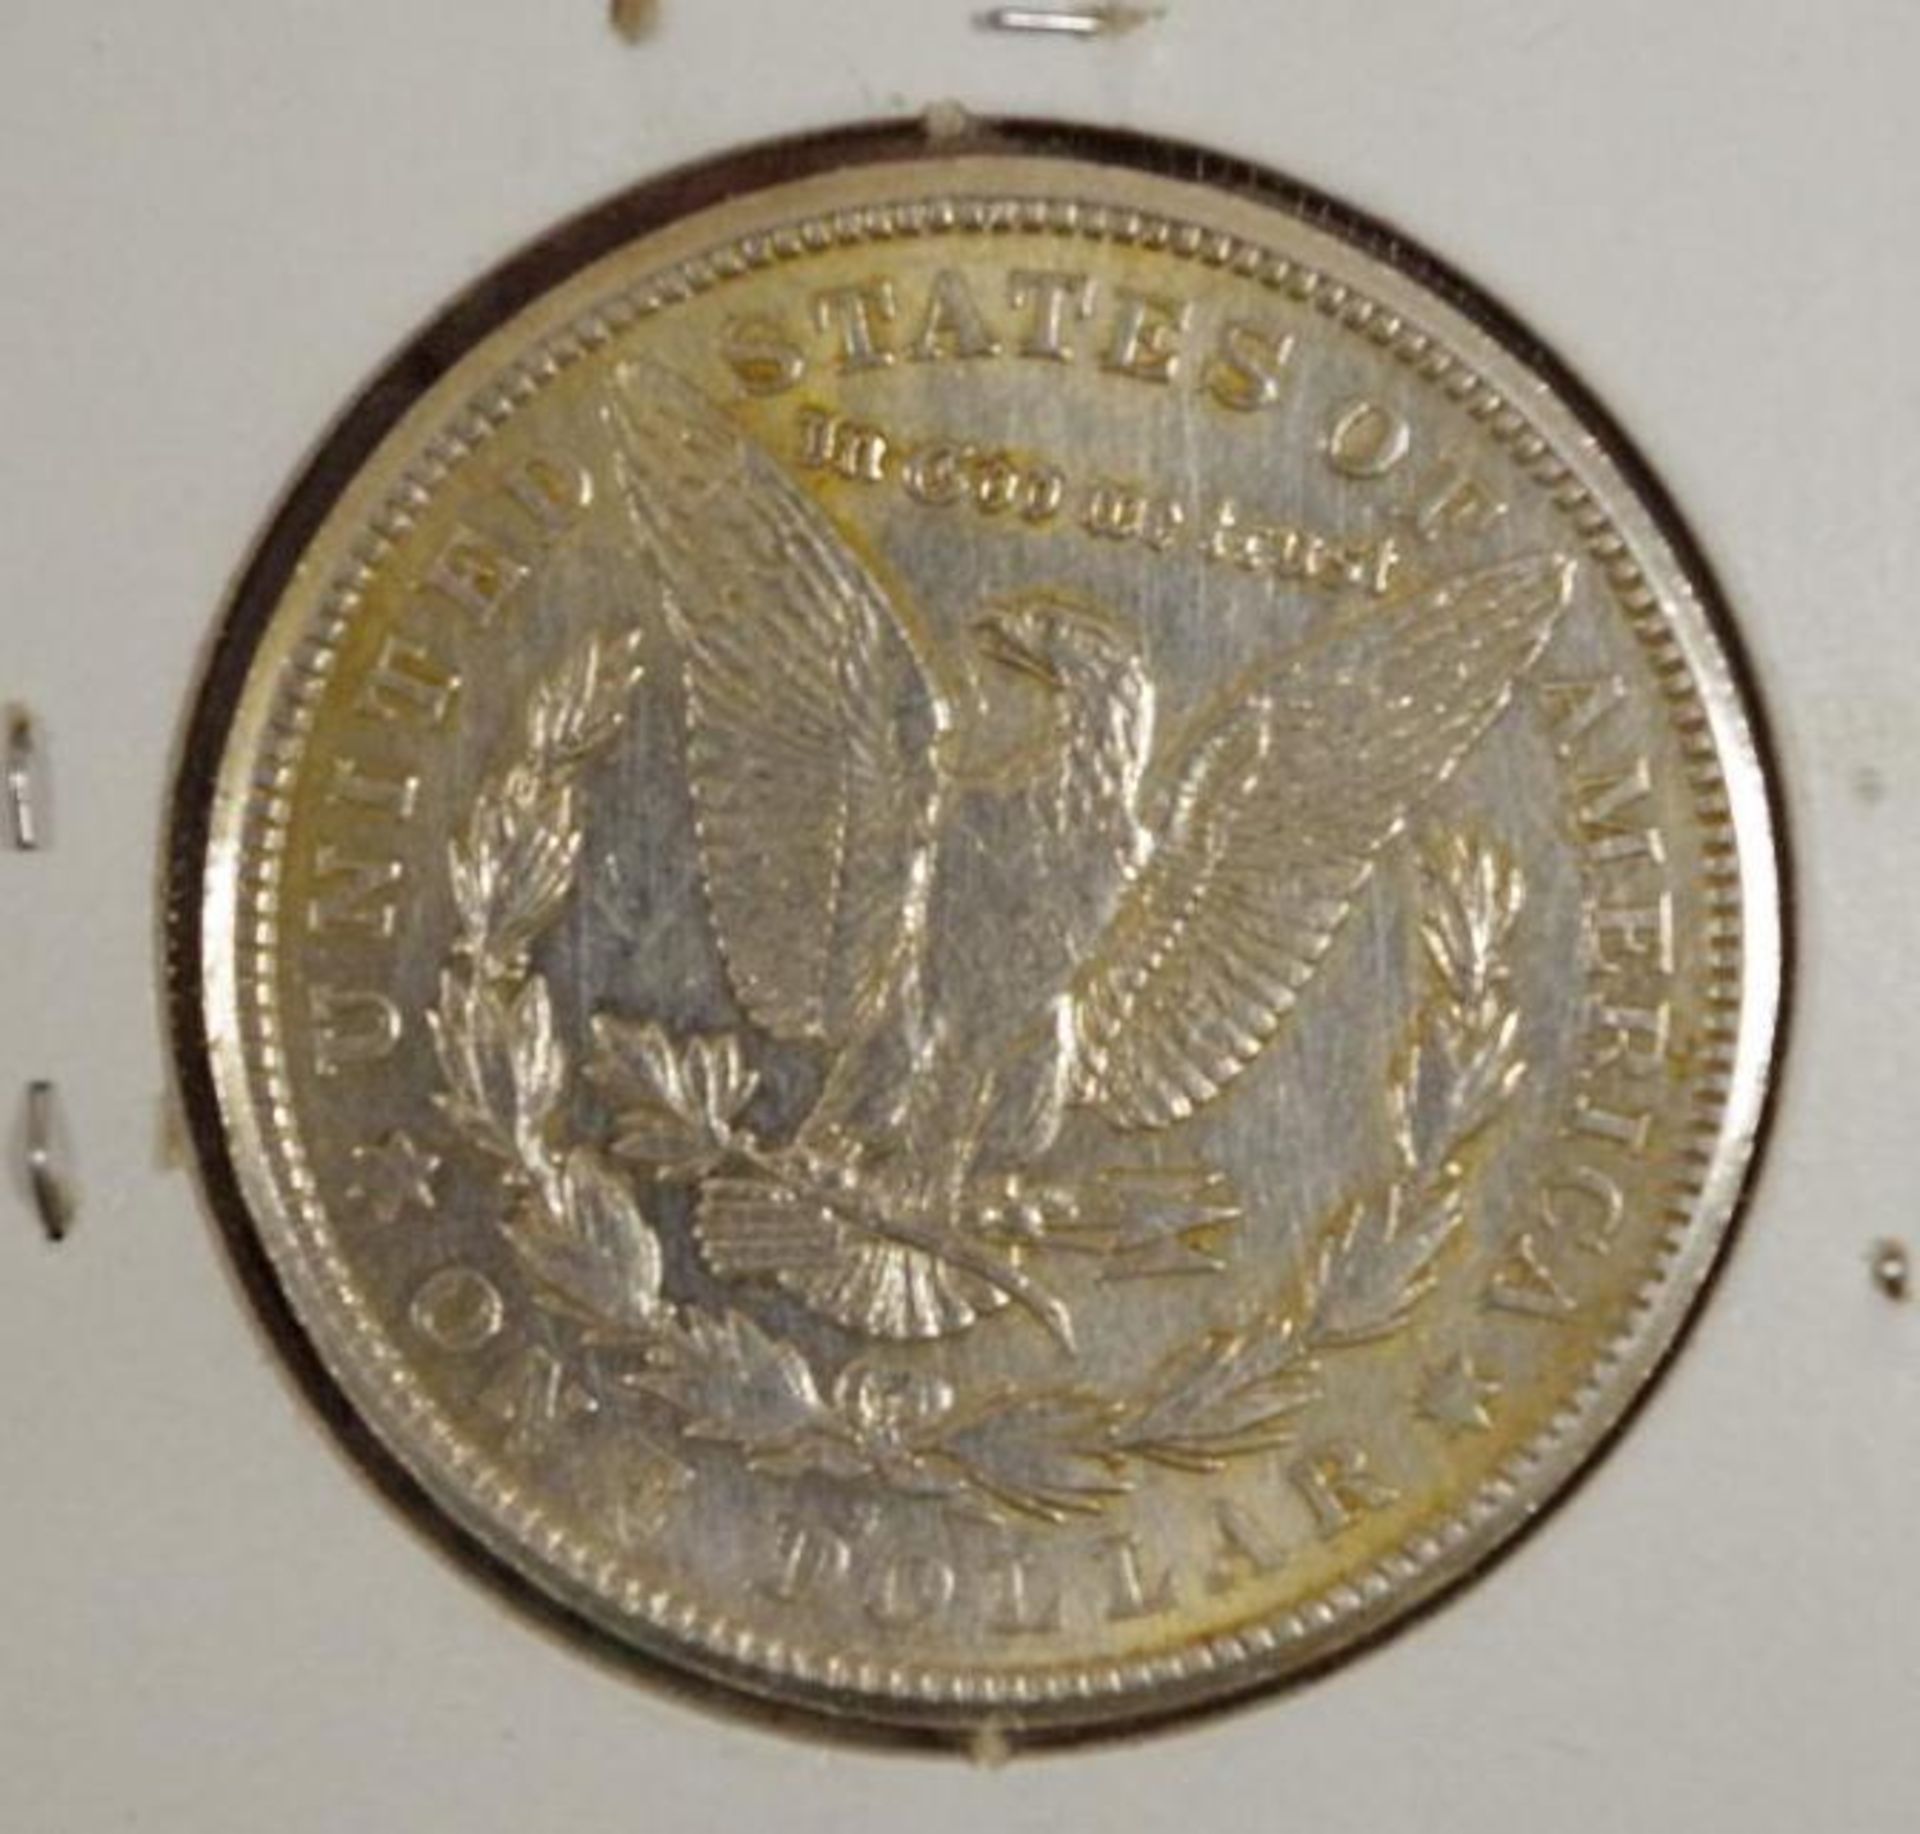 Uncirculated Silver Dollar, 1921-S - Image 2 of 2